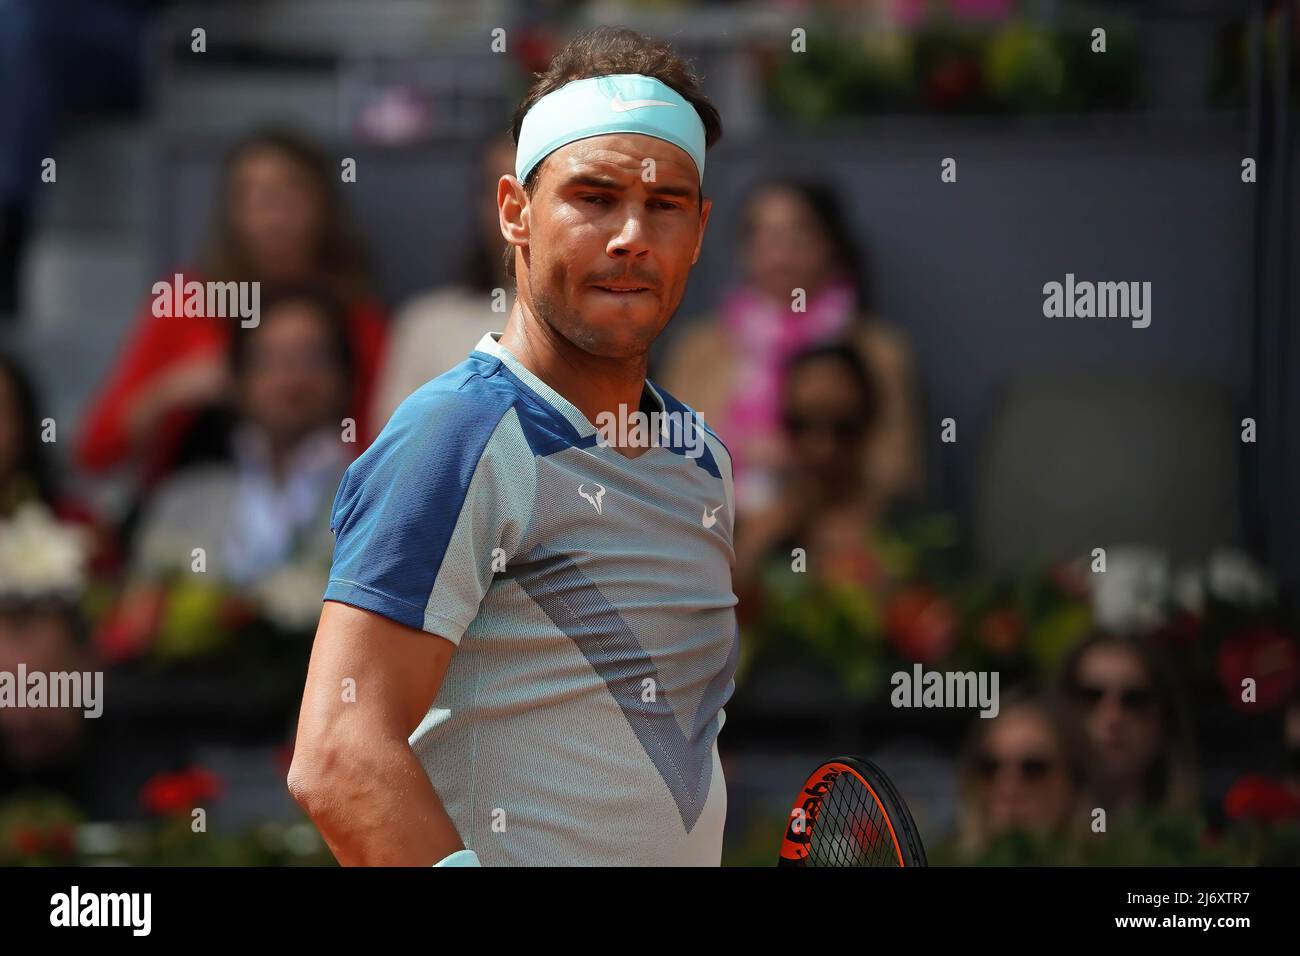 Rafael Nadal of Spain plays in their second round match against Miomir Kecmanovic of Serbia on day seven of Mutua Madrid Open at La Caja Magica in Madrid